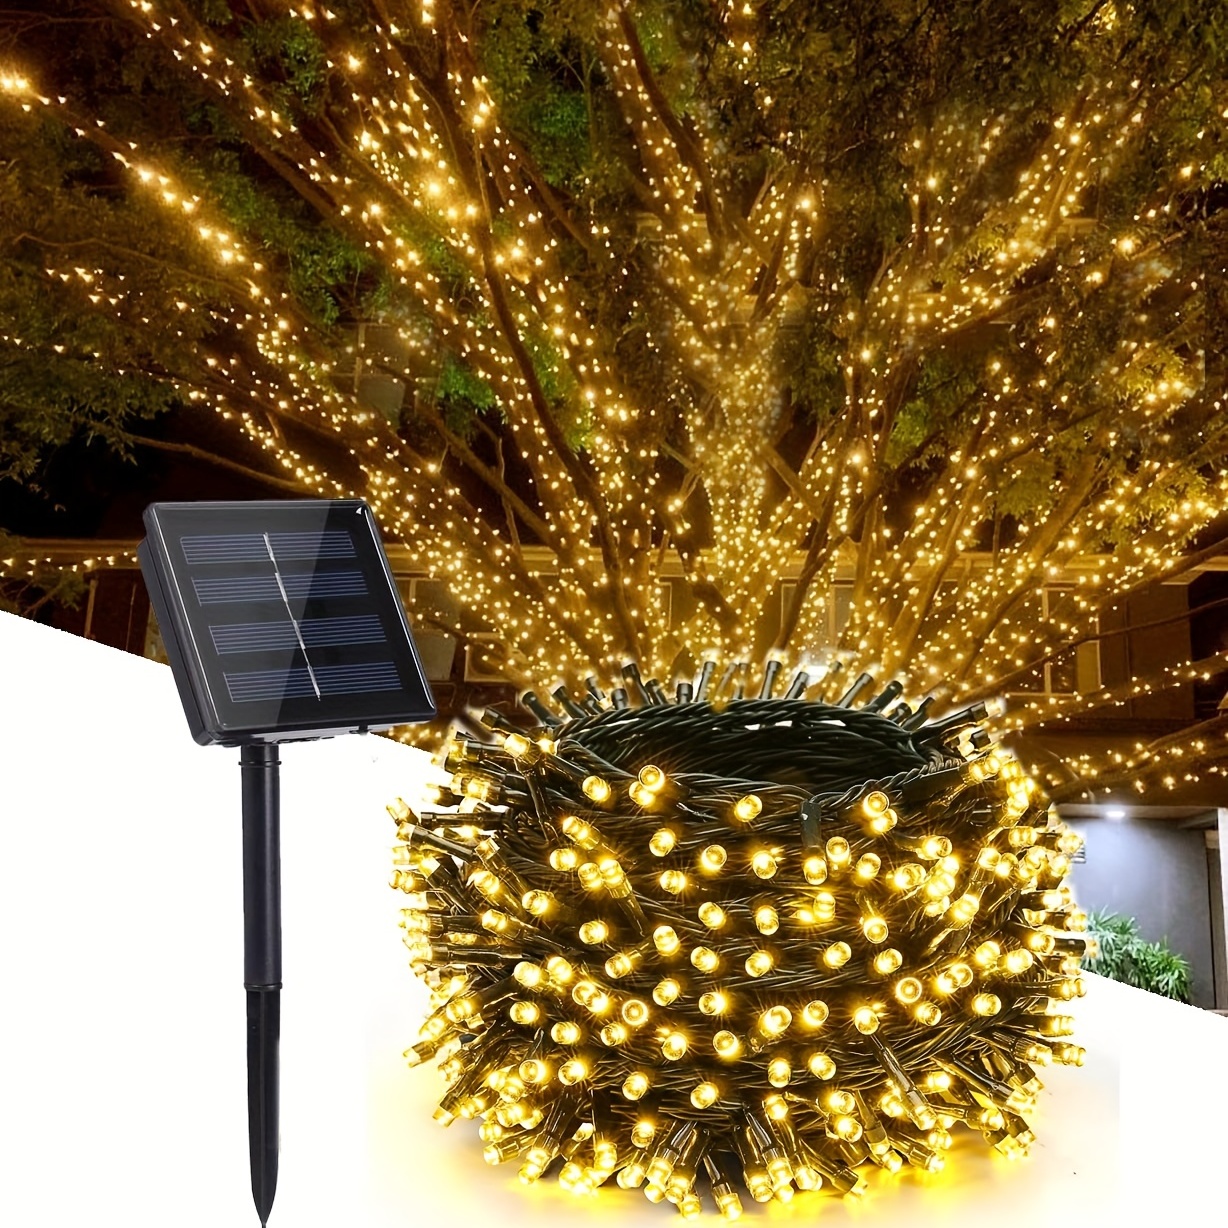 BEEWIN 2 Pack Orange Solar Fairy Lights Outdoor,Each 33ft 100 LED Solar  Powered Halloween String Lights,Waterproof Copper Wire Twinkle Light for